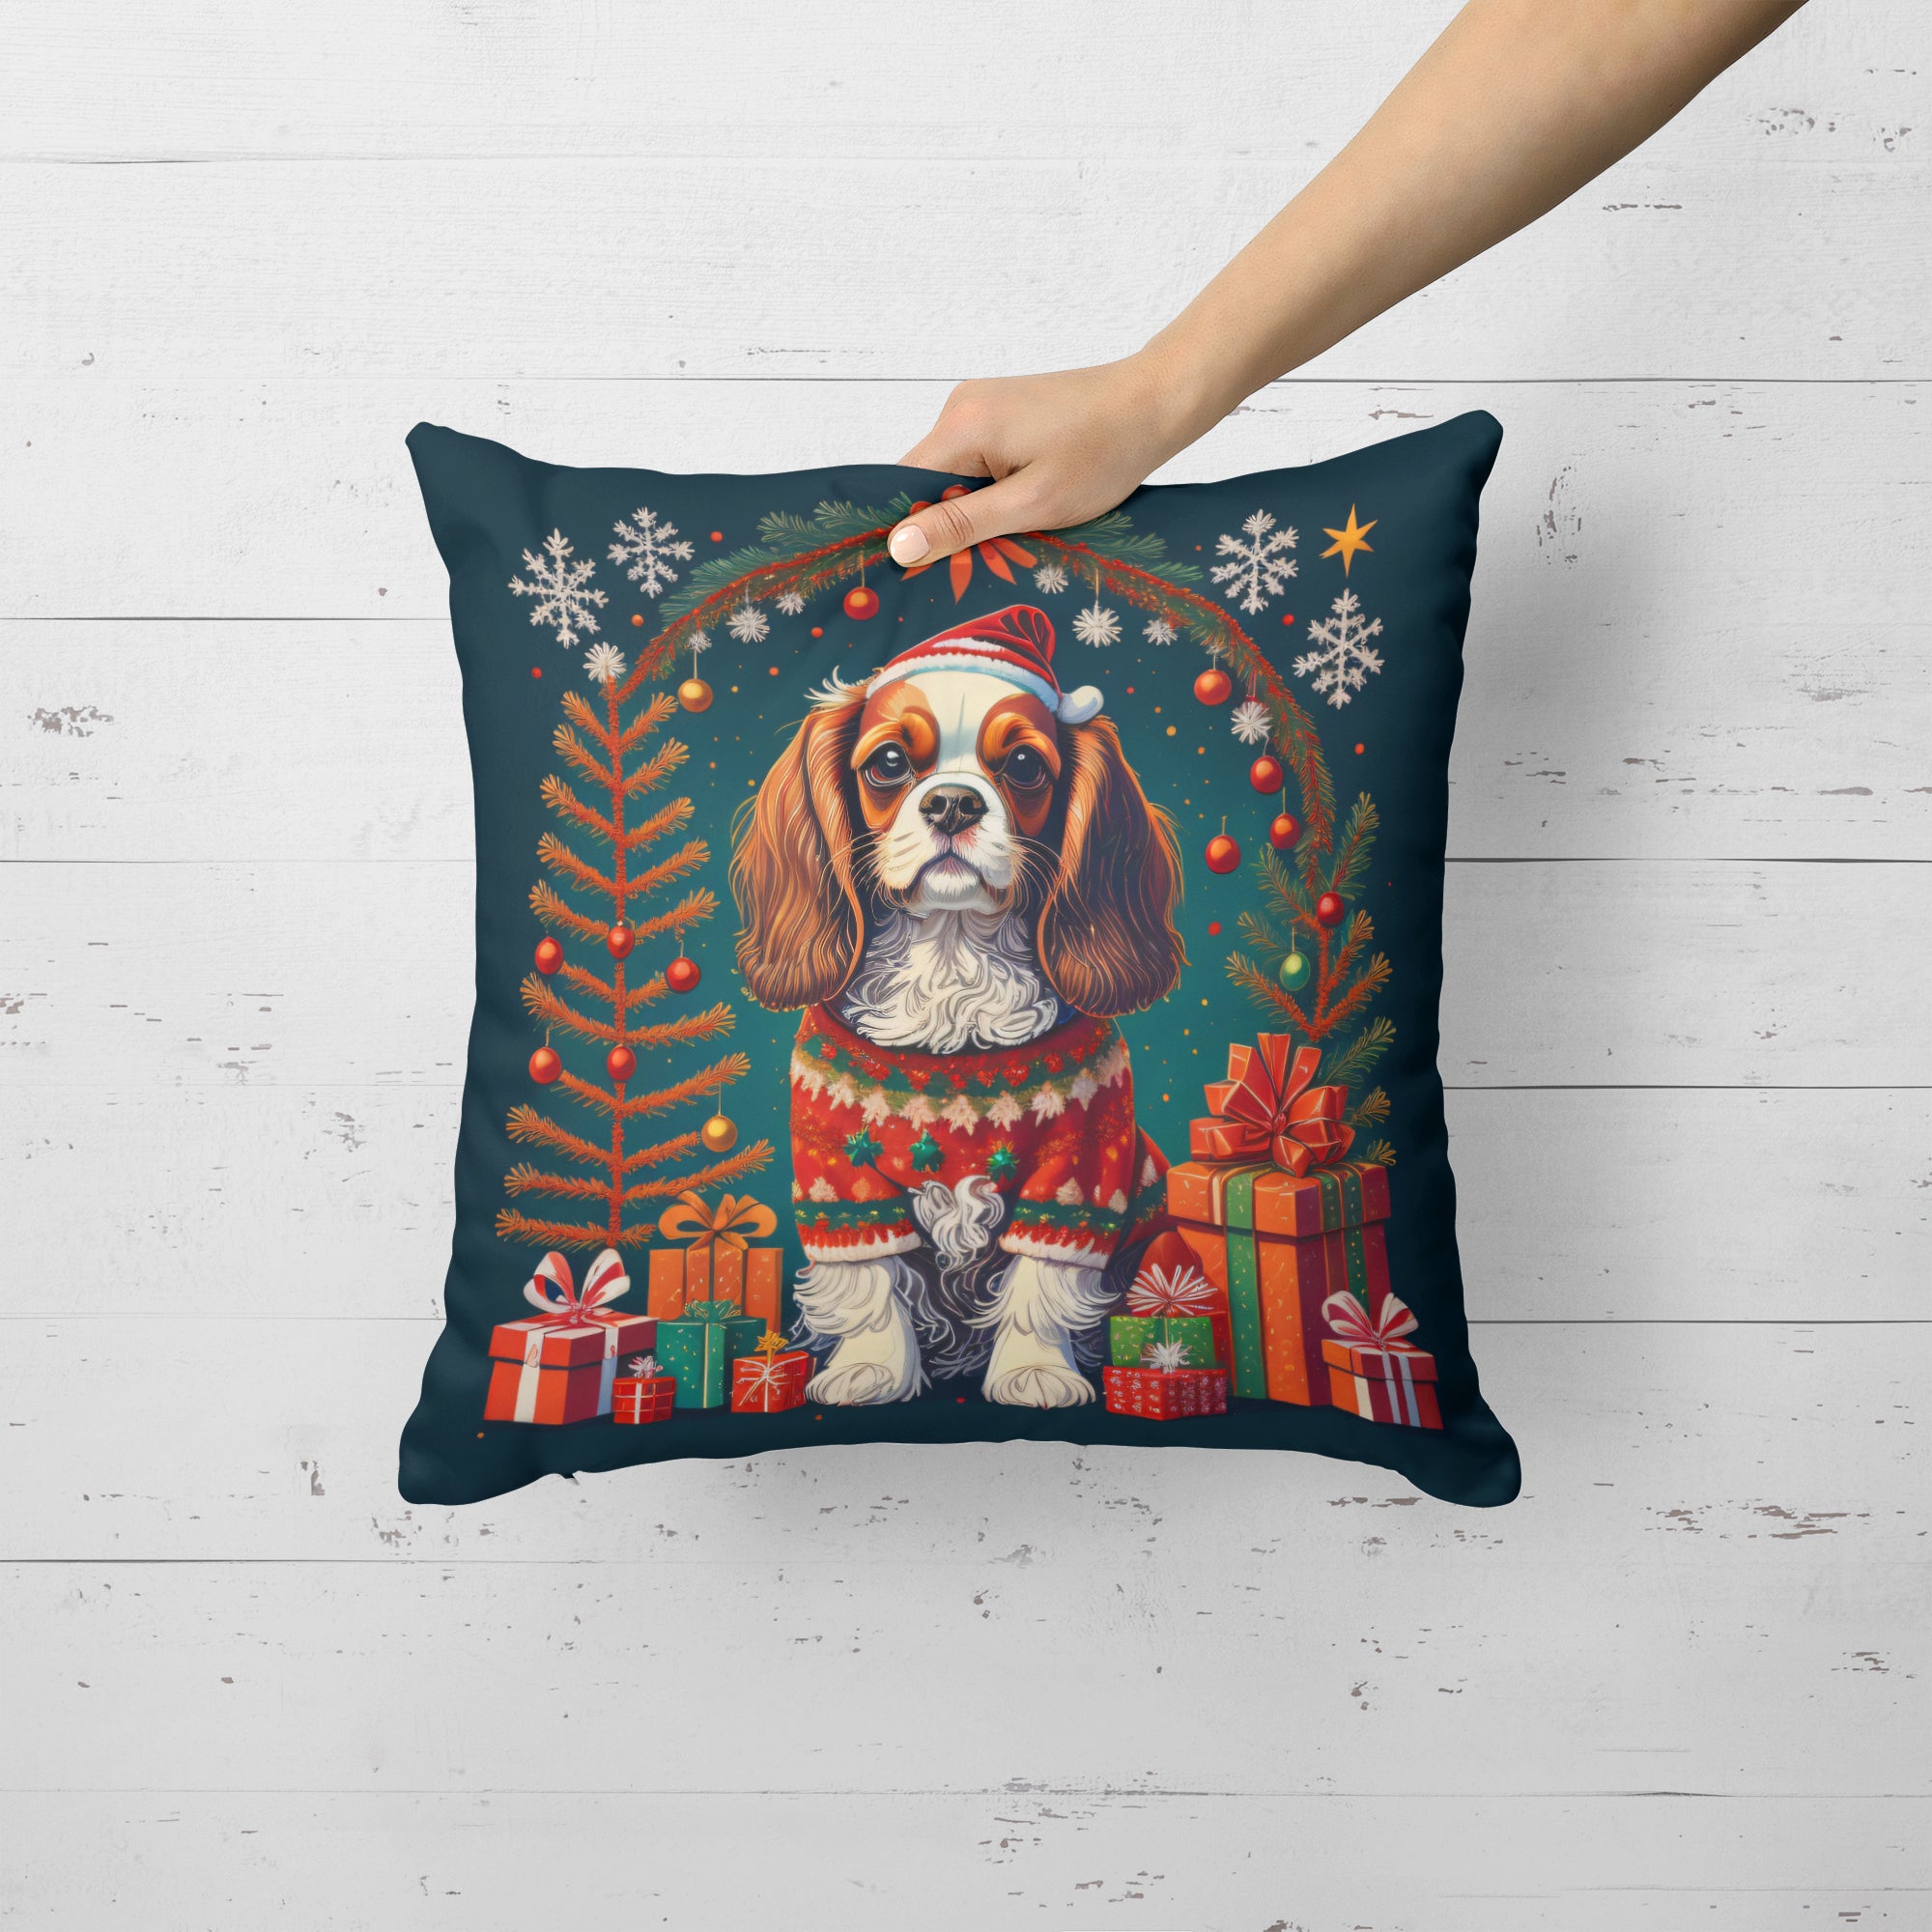 Buy this Cavalier King Charles Spaniel Christmas Fabric Decorative Pillow